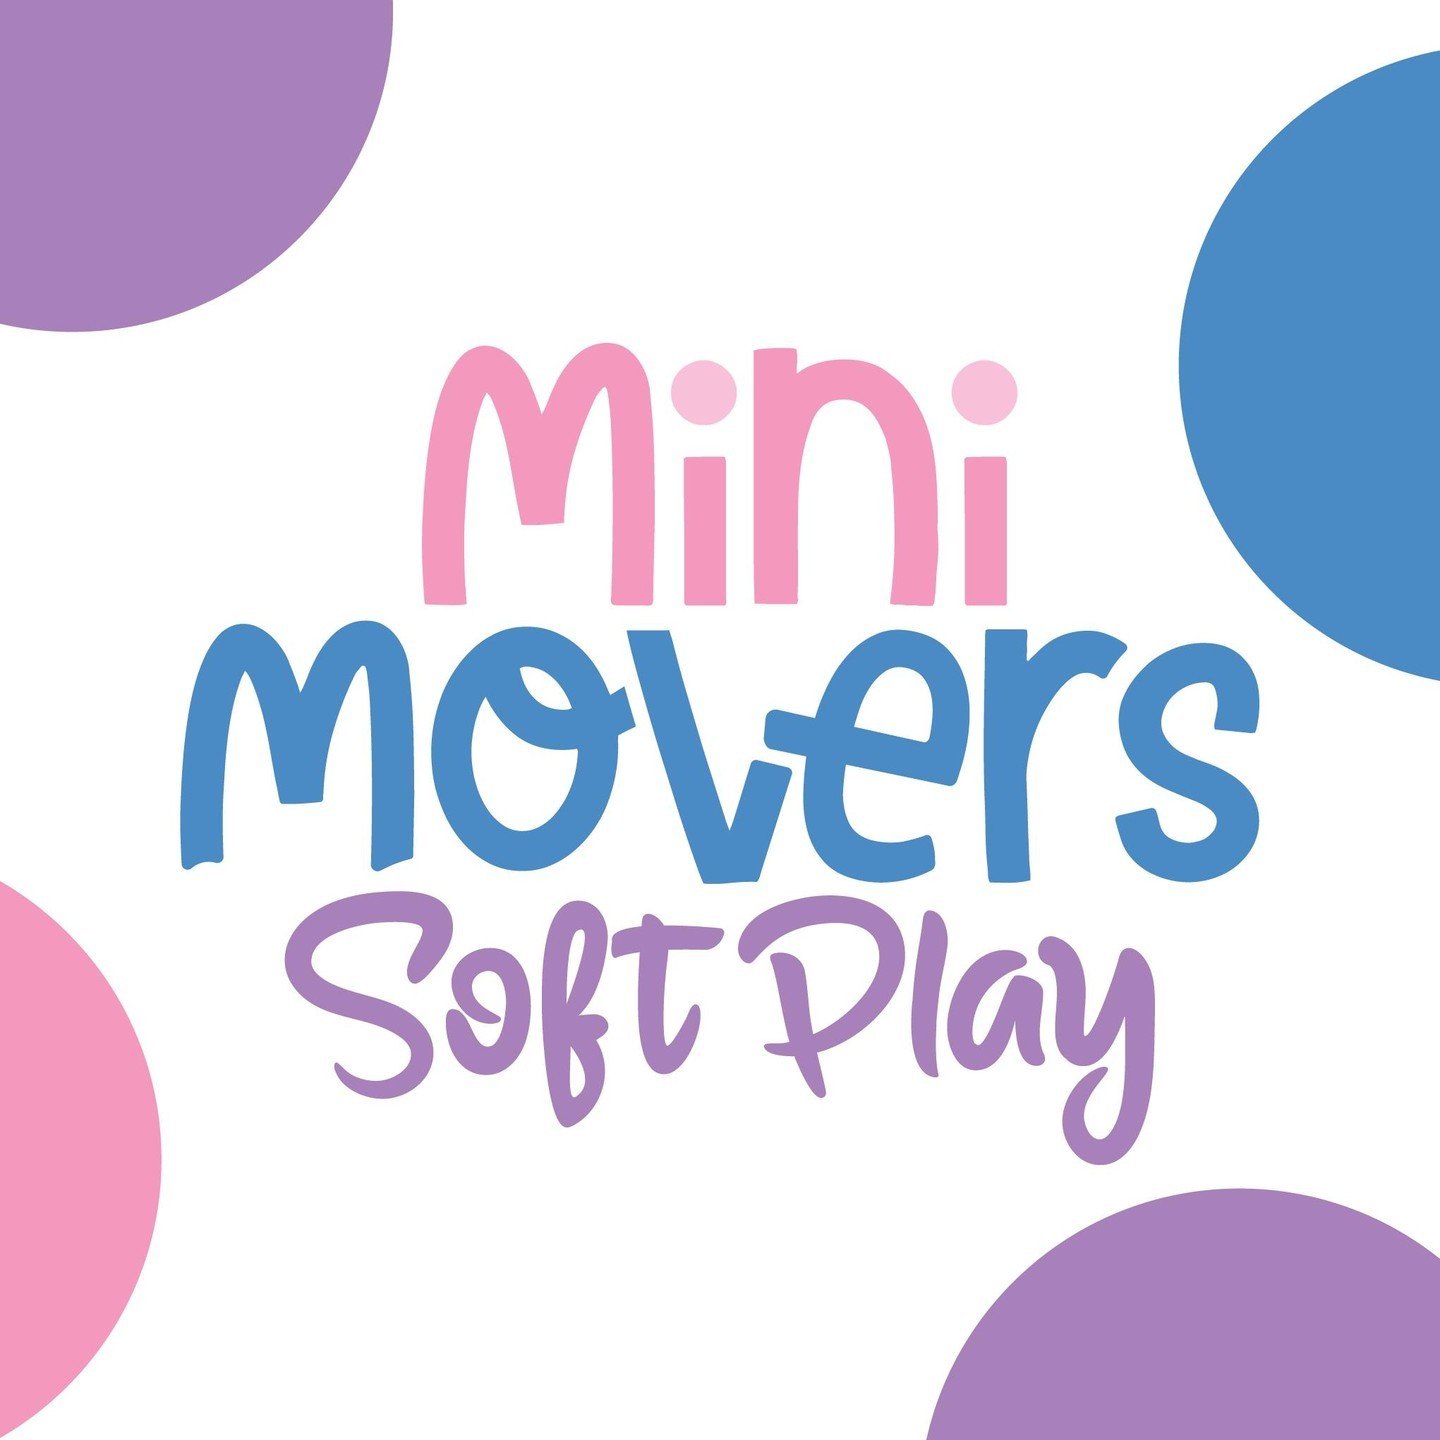 New brand identity loading for Mini Movers Softplay! 💙💖💜 

I was so excited to work on this project because I'm a mom and love what Mini Movers offers! I wish I would have known about Mini Movers when Em and Jax  turned 1 because this would have b